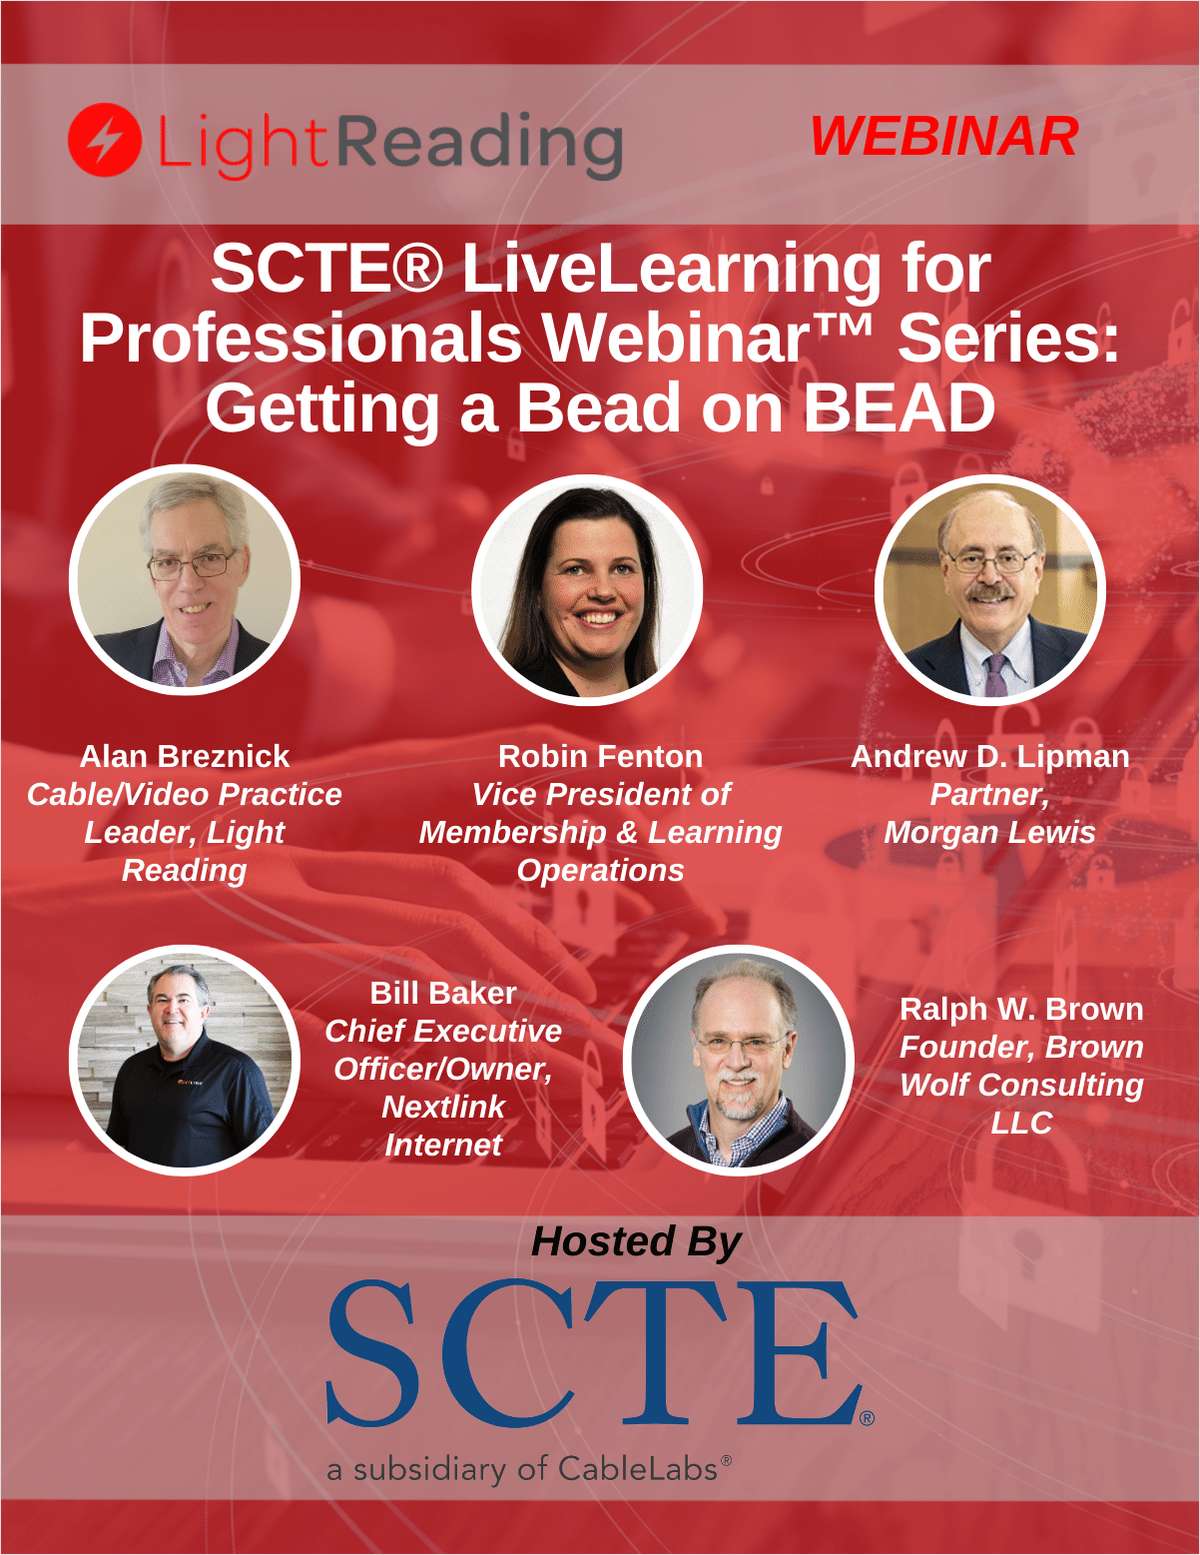 SCTE® LiveLearning for Professionals Webinar™ Series: Getting a Bead on BEAD